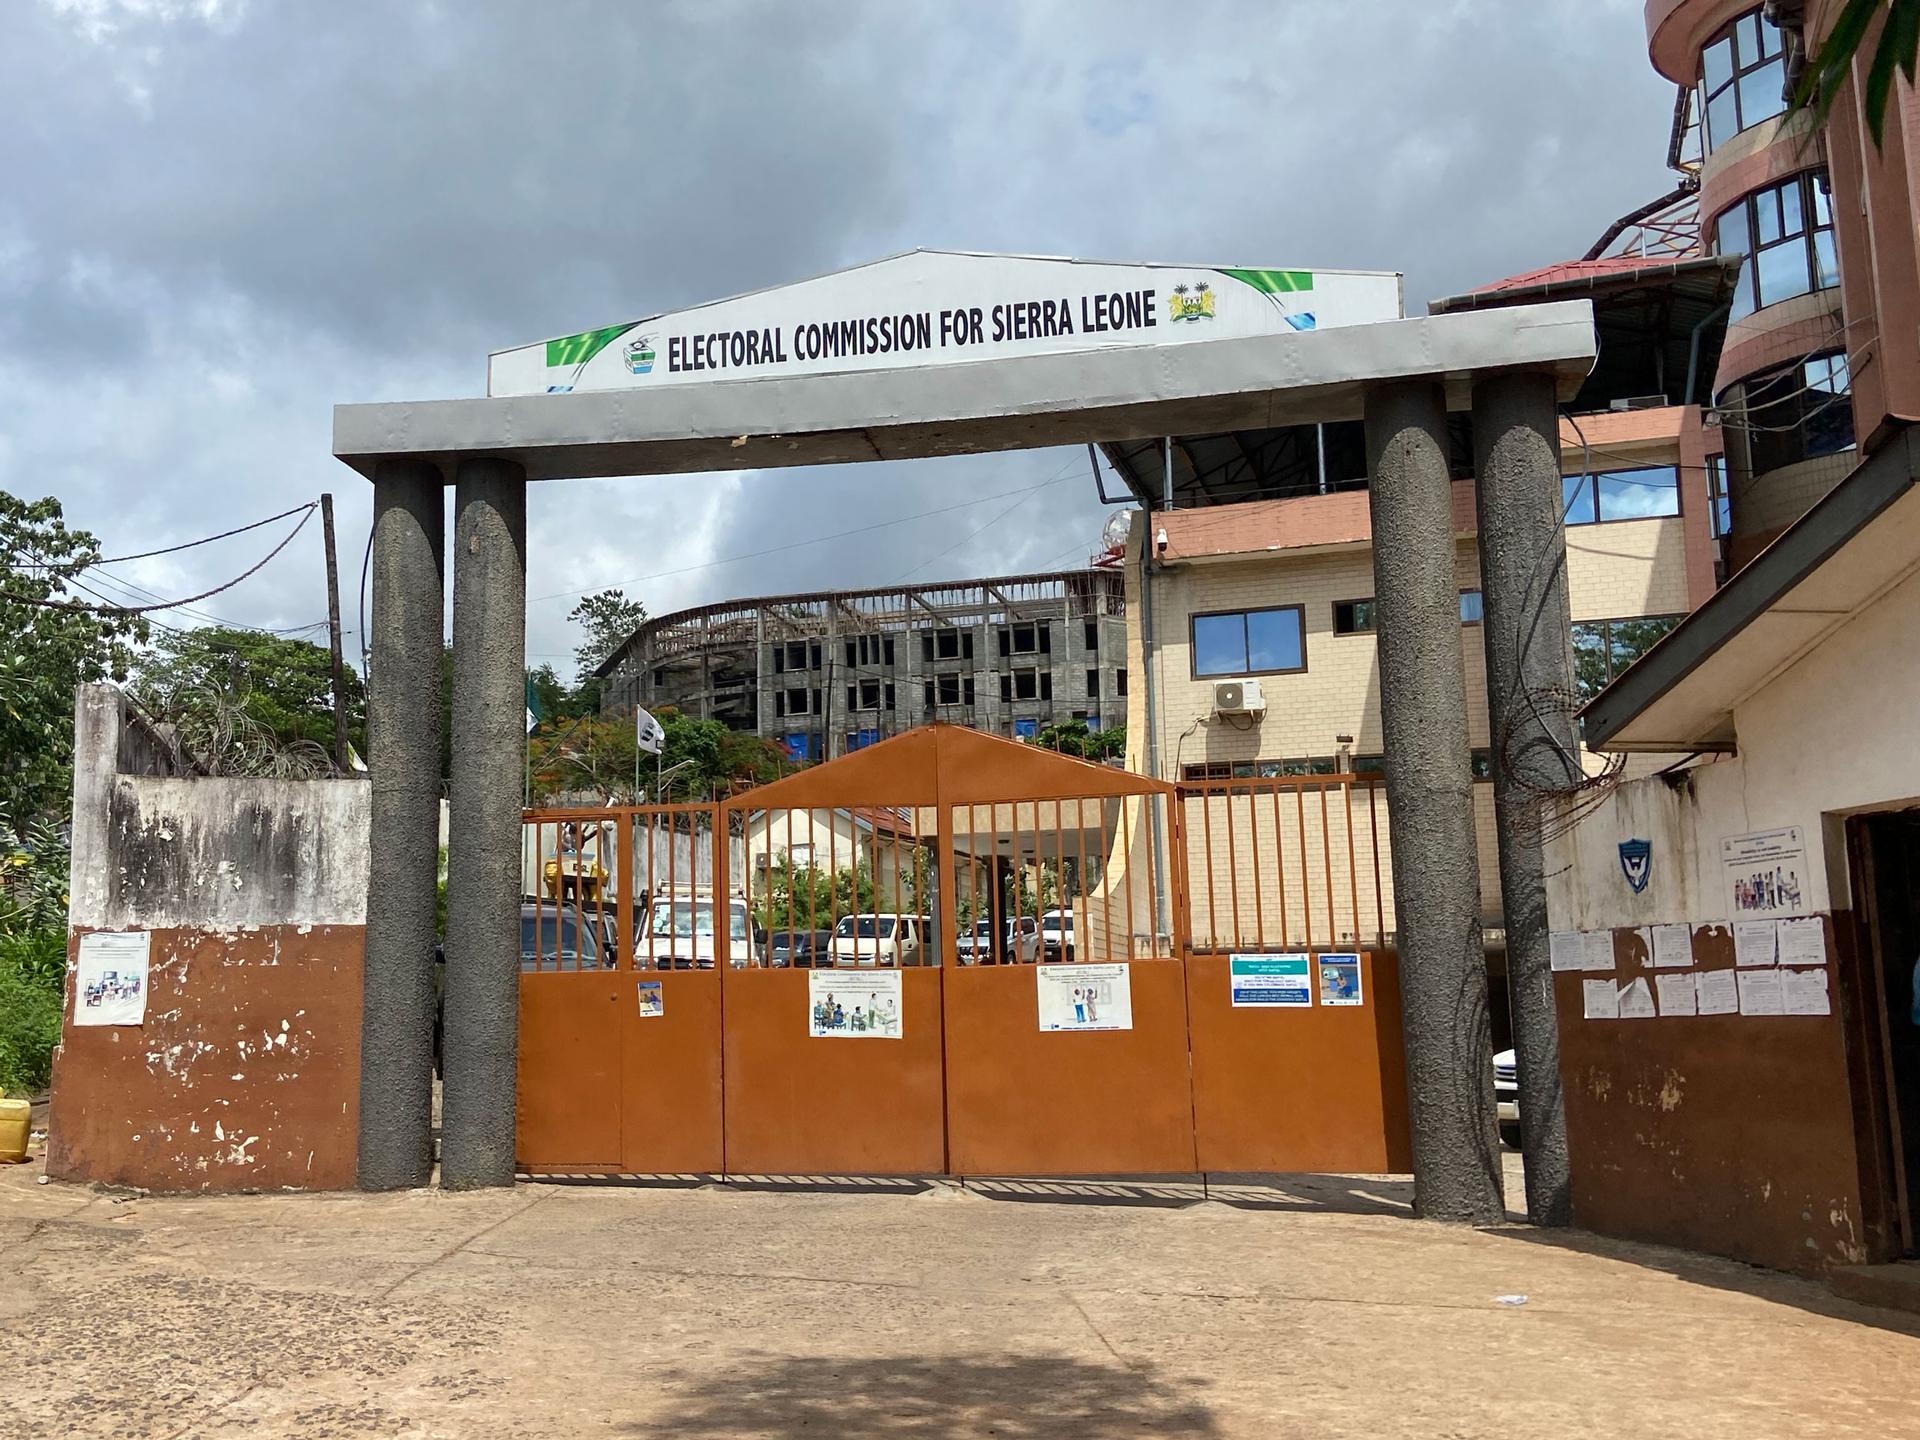 The Electoral Commission Building in Freetown prepares for Sierra Leone's pivotal elections on June 24, 2023.